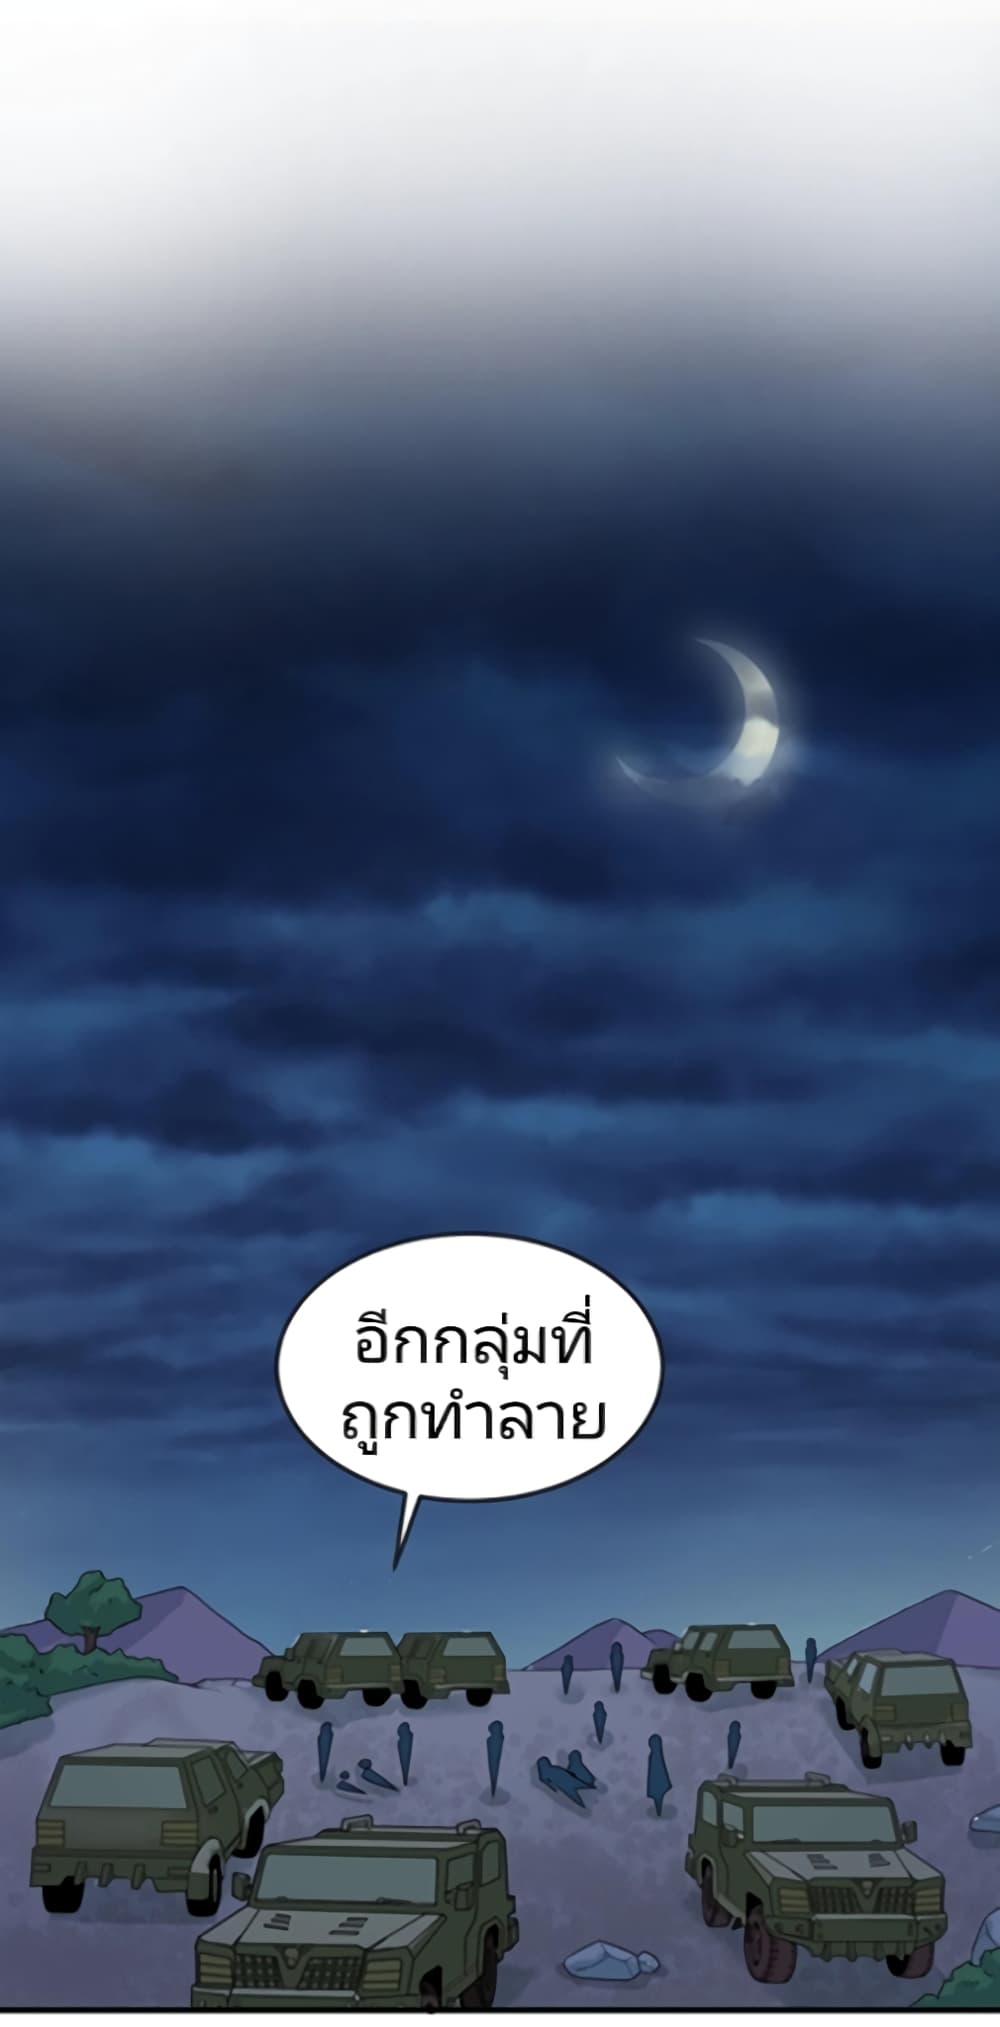 The Age of Ghost Spirits à¸à¸­à¸à¸à¸µà¹ 24 (14)